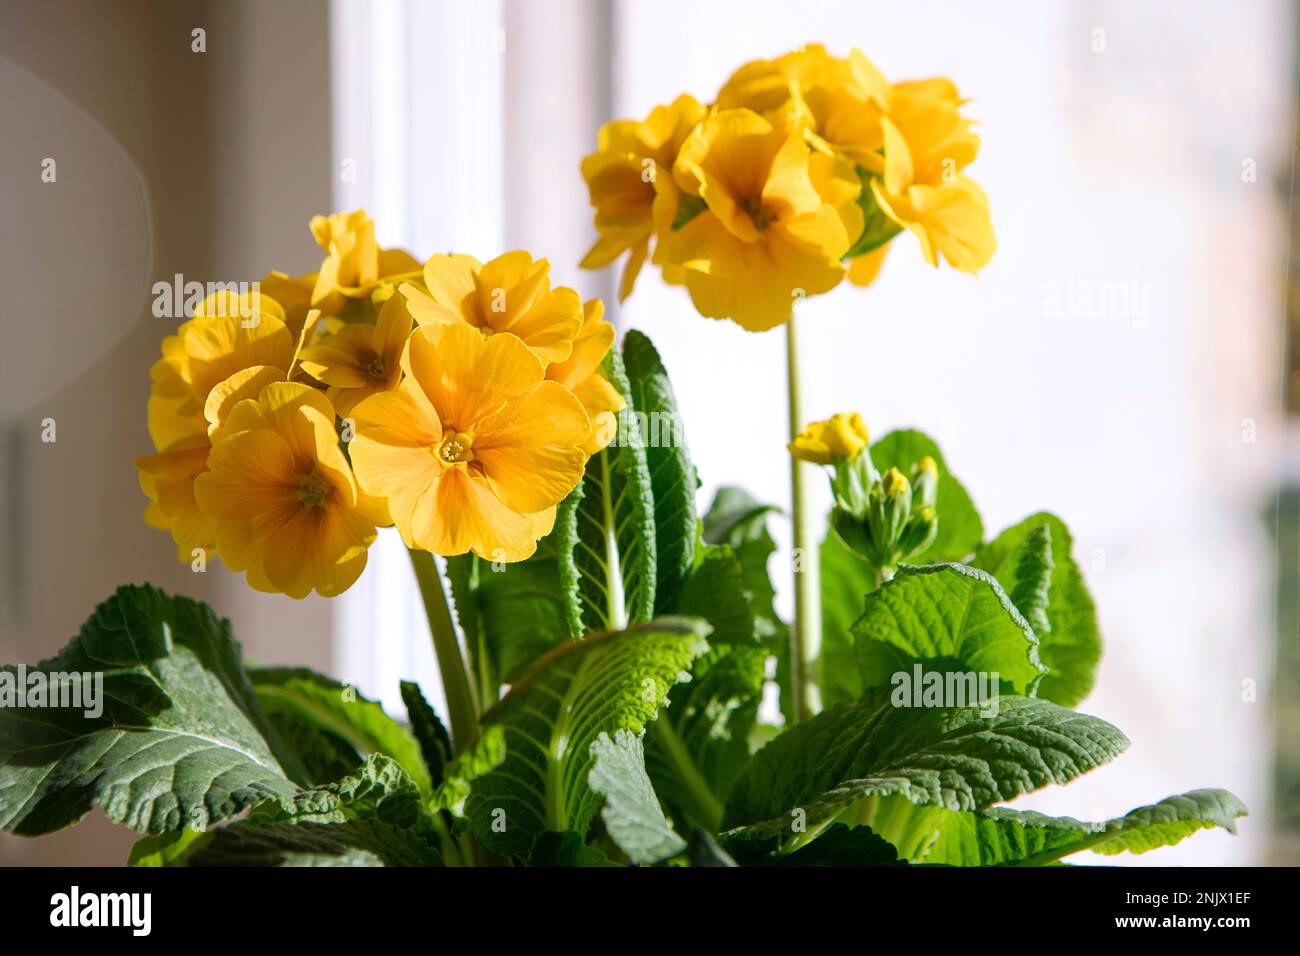 Primula elatior, golden yellow spring flowers indoors. Primrose flower head close-up with green leaves, spring potted plant. Stock Photo